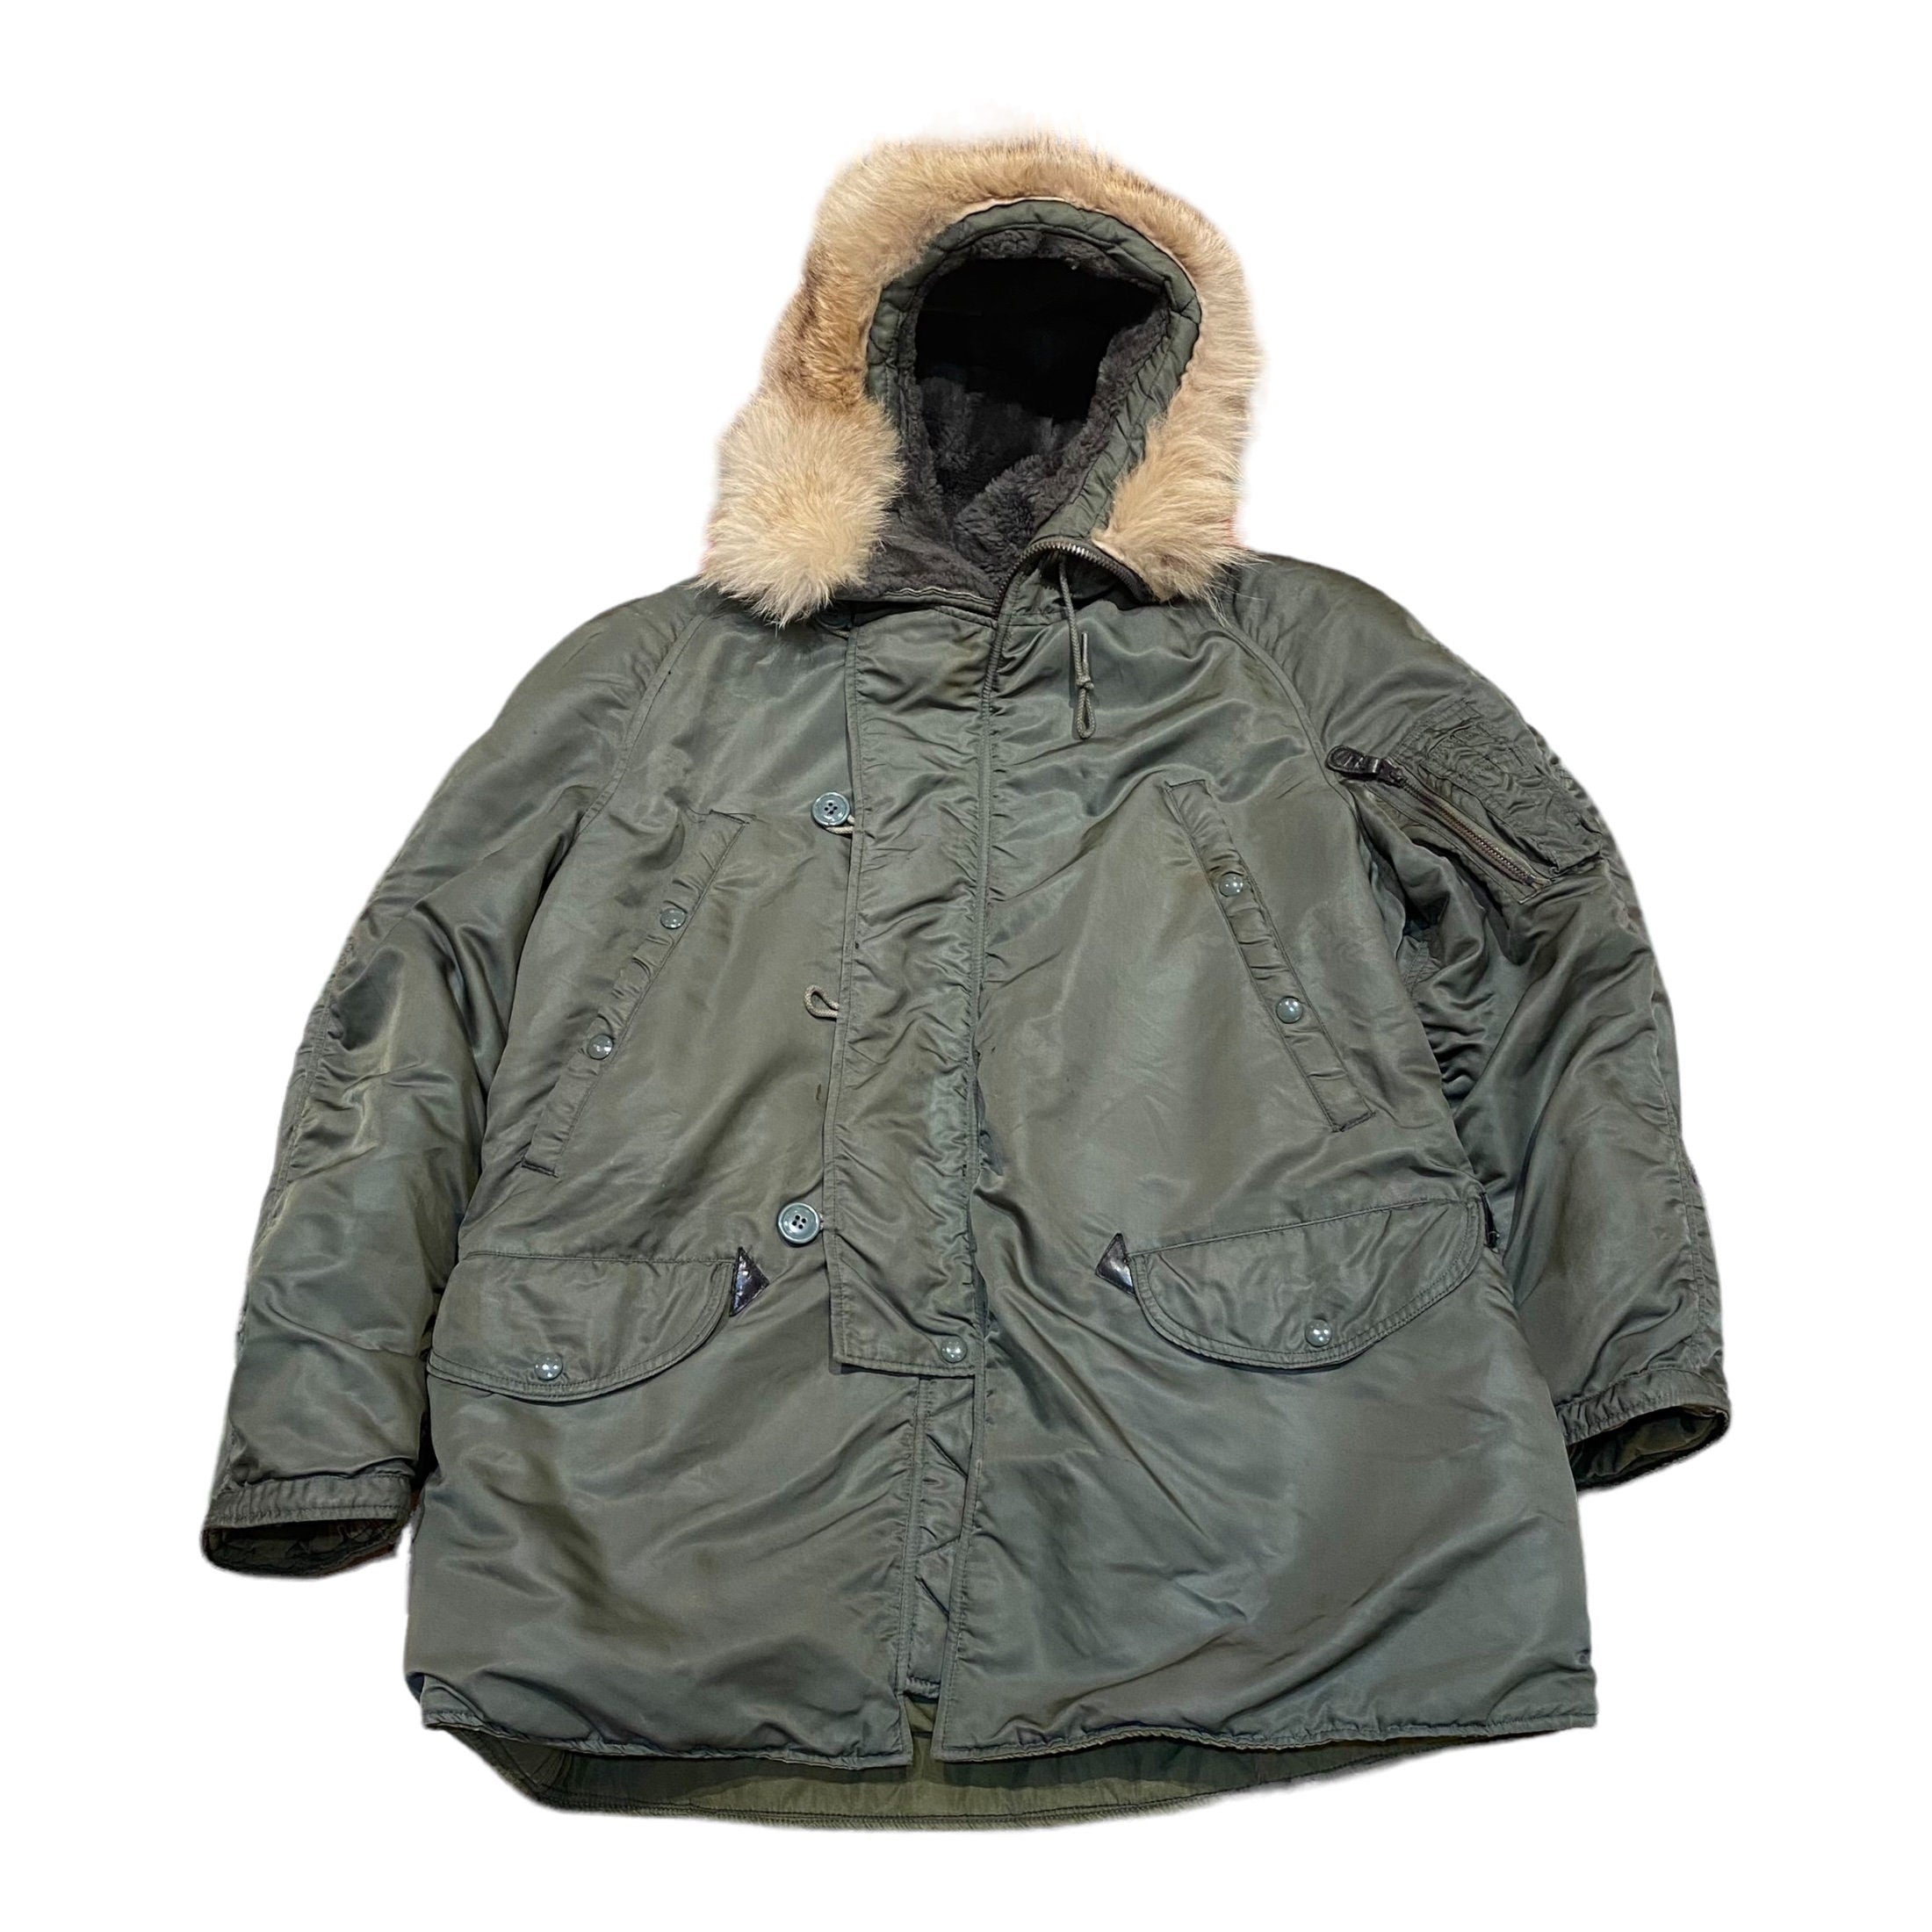 Hunting/Military Jackets – People's Champ Vintage